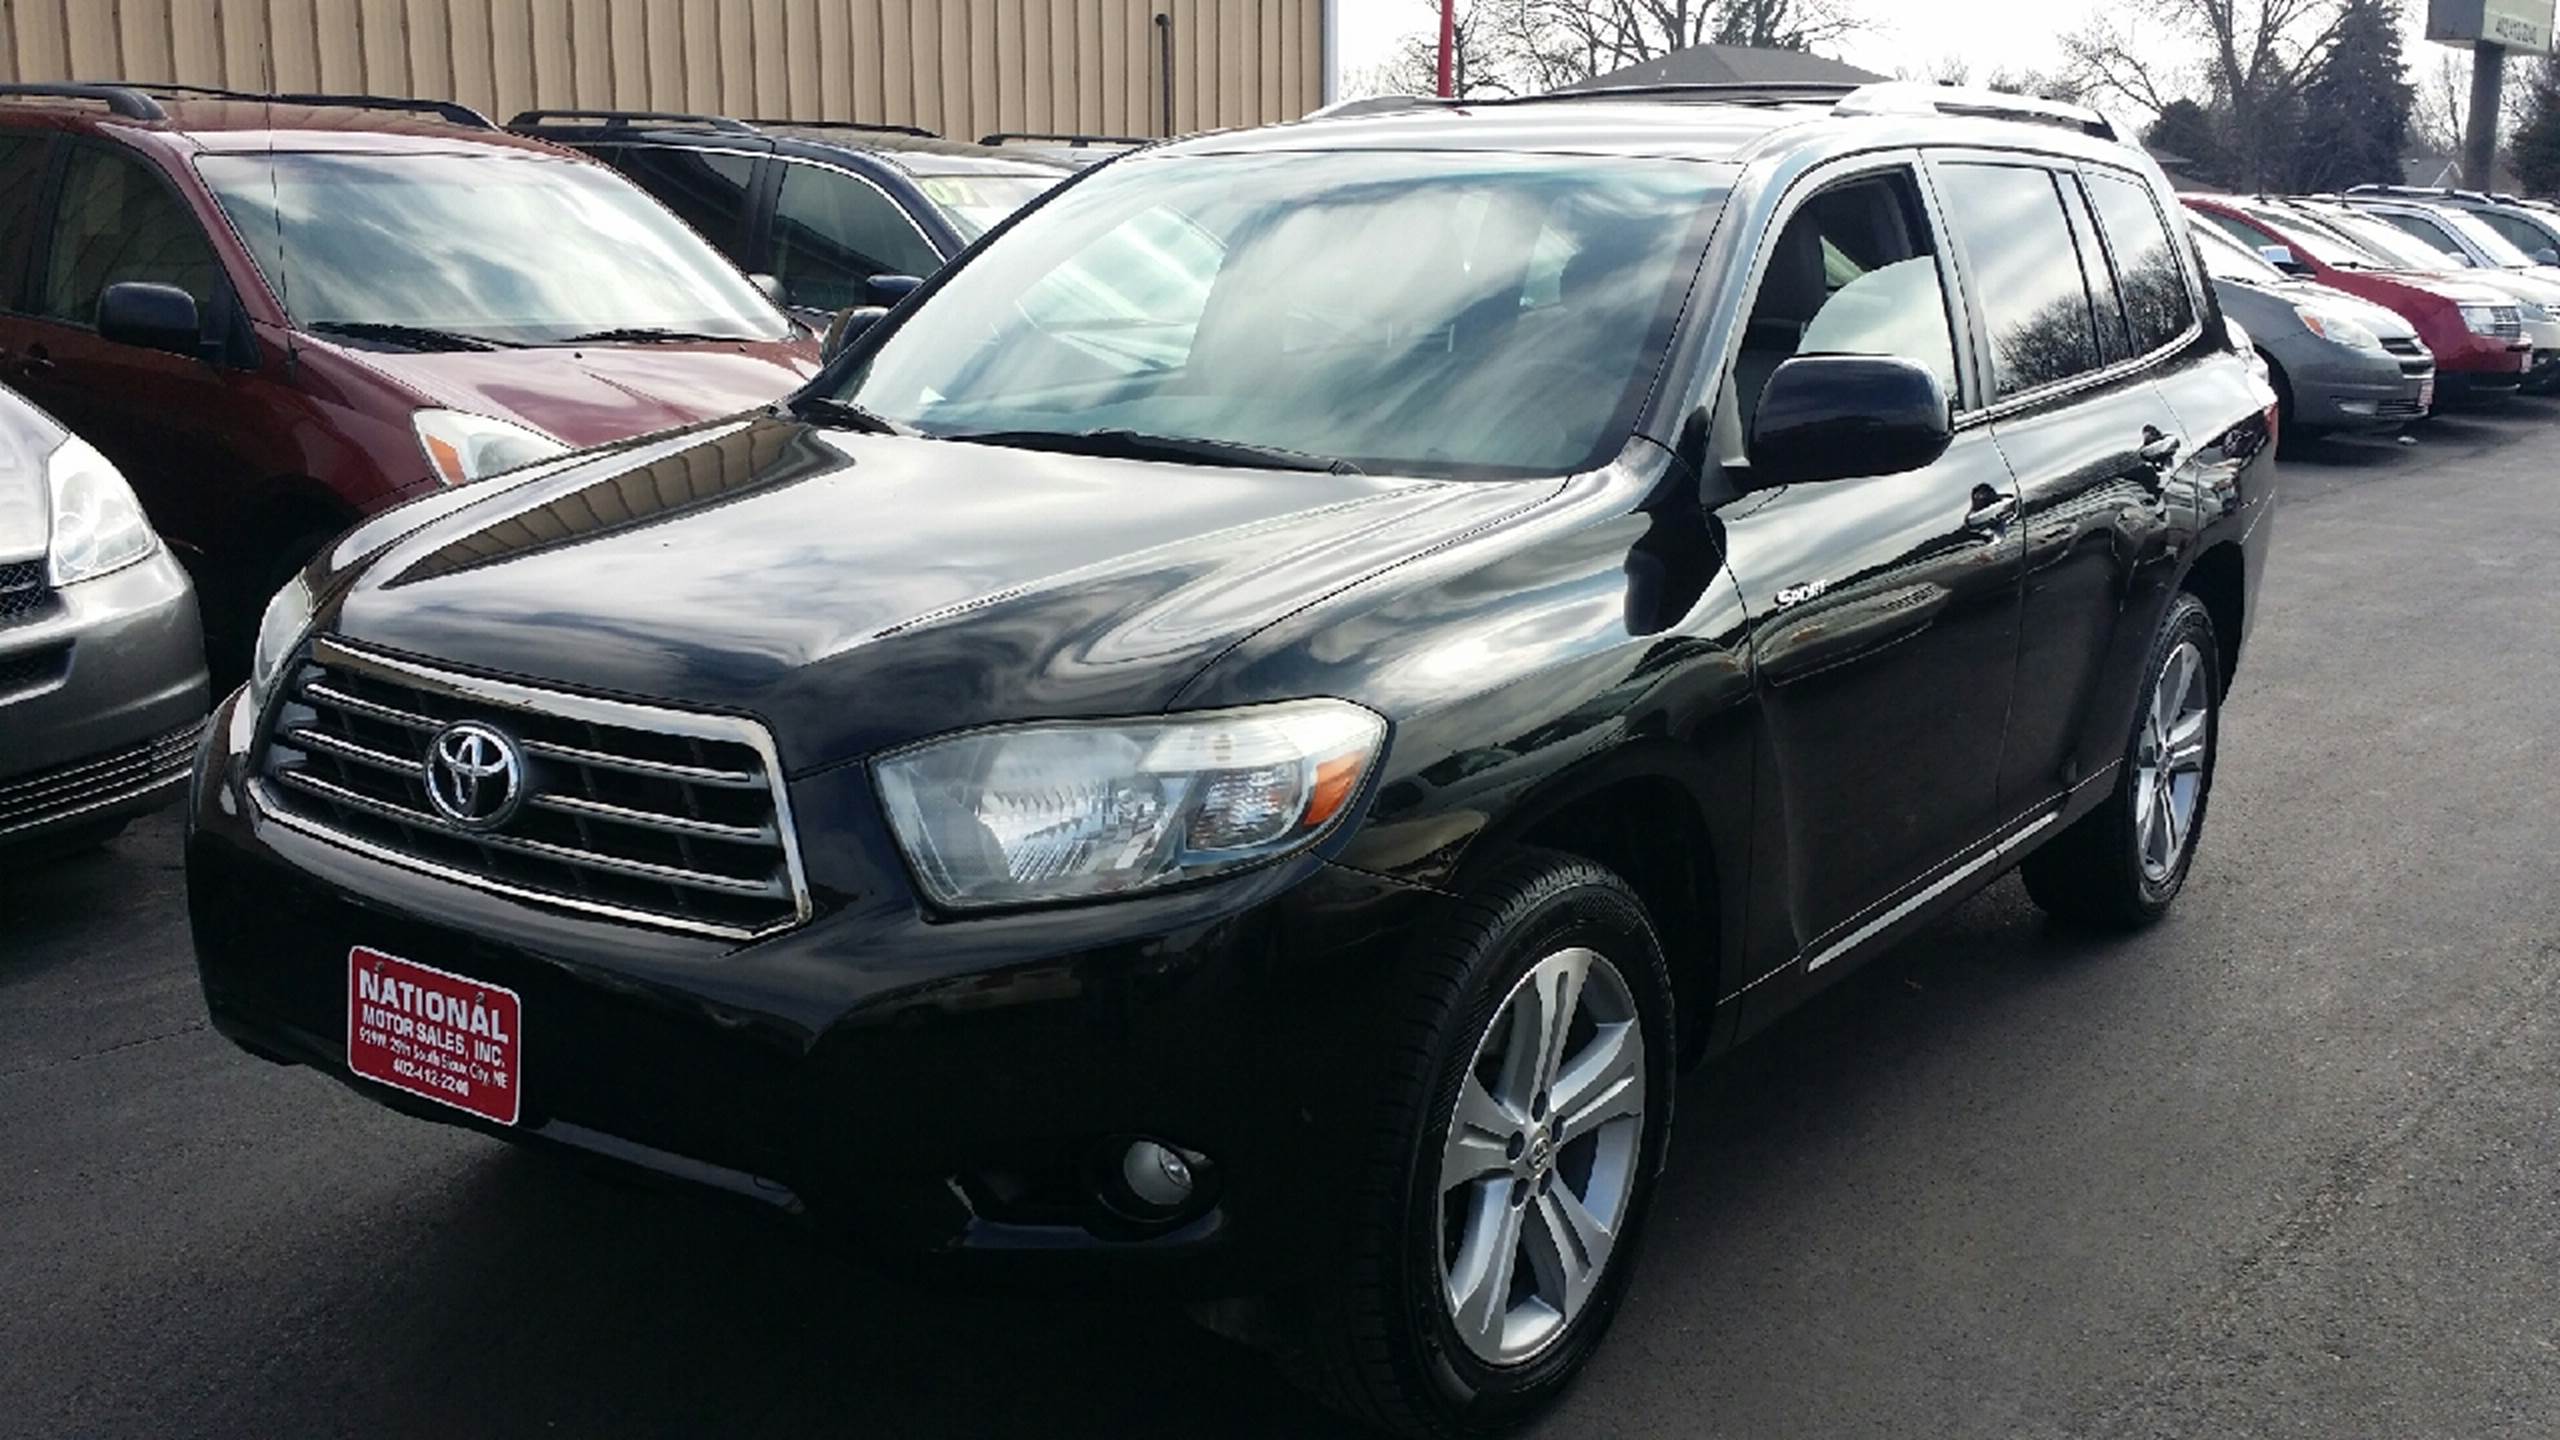 2008 Toyota Highlander for sale at National Motor Sales Inc in South Sioux City NE